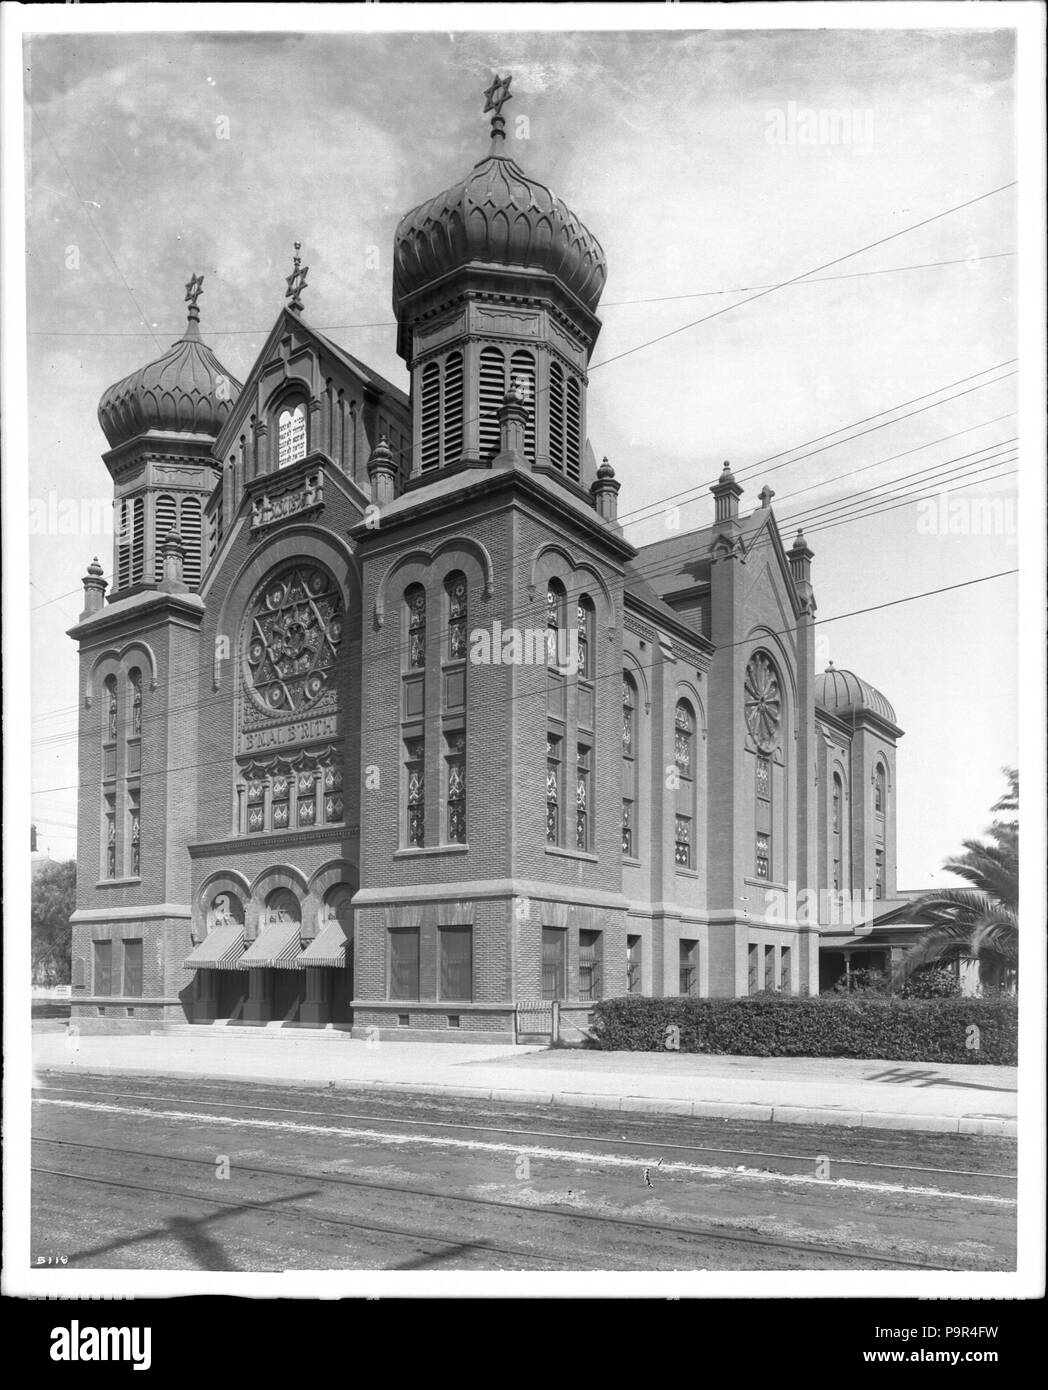 . English: B'nai B'rith Synagogue (Temple), located on Hope and 9th Streets, Los Angeles, ca.1900  Photograph of the B'nai B'rith Synagogue (Temple), view of Hope Street facade, south towards 9th Street, Downtown Los Angeles, ca.1900. Former temple of the present day Wilshire Boulevard Temple Congregation.     The front facade was composed of two square towers with onion dome tops flanking the central aisle. 'B'nai B'rith', the name of the temple, is prominently displayed on the facade, right below the circular stained-glass window where the Star of David embossed in it. Above the circular sta Stock Photo